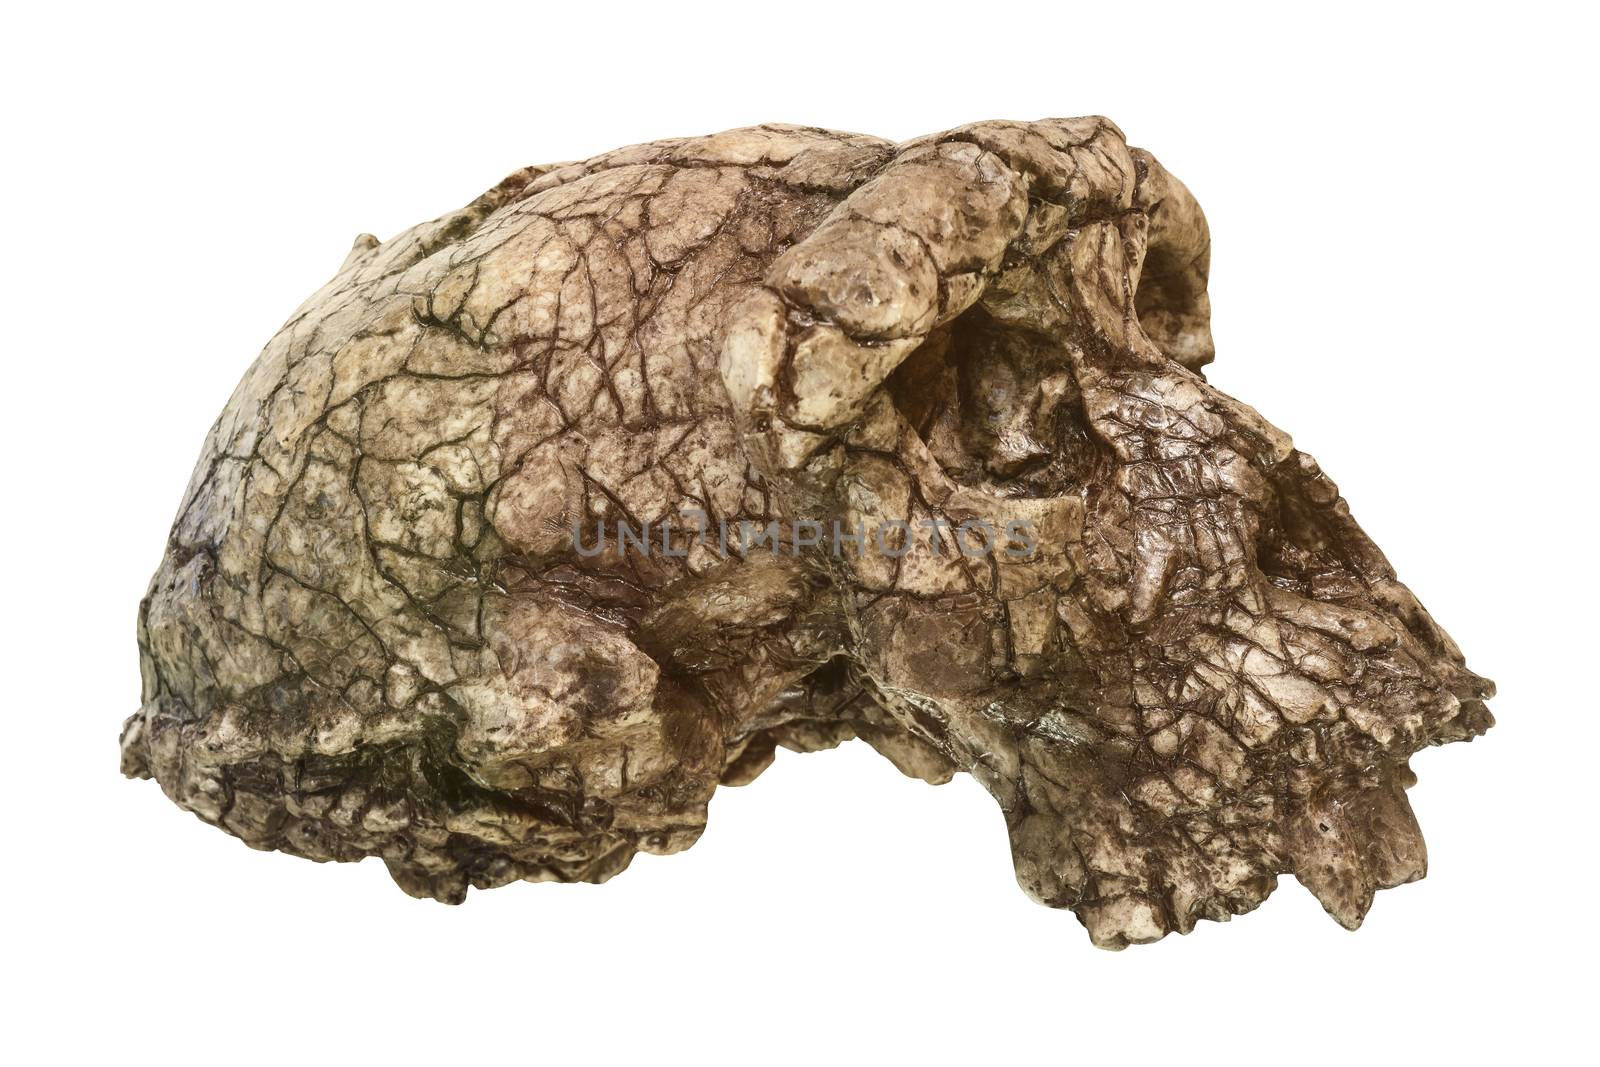 Sahelanthropus tchadensis Skull ( Toumai ) . Discovered in 2001 in Djurab desert in Northern Chad , Central africa . Dated to 7-6 million years ago .